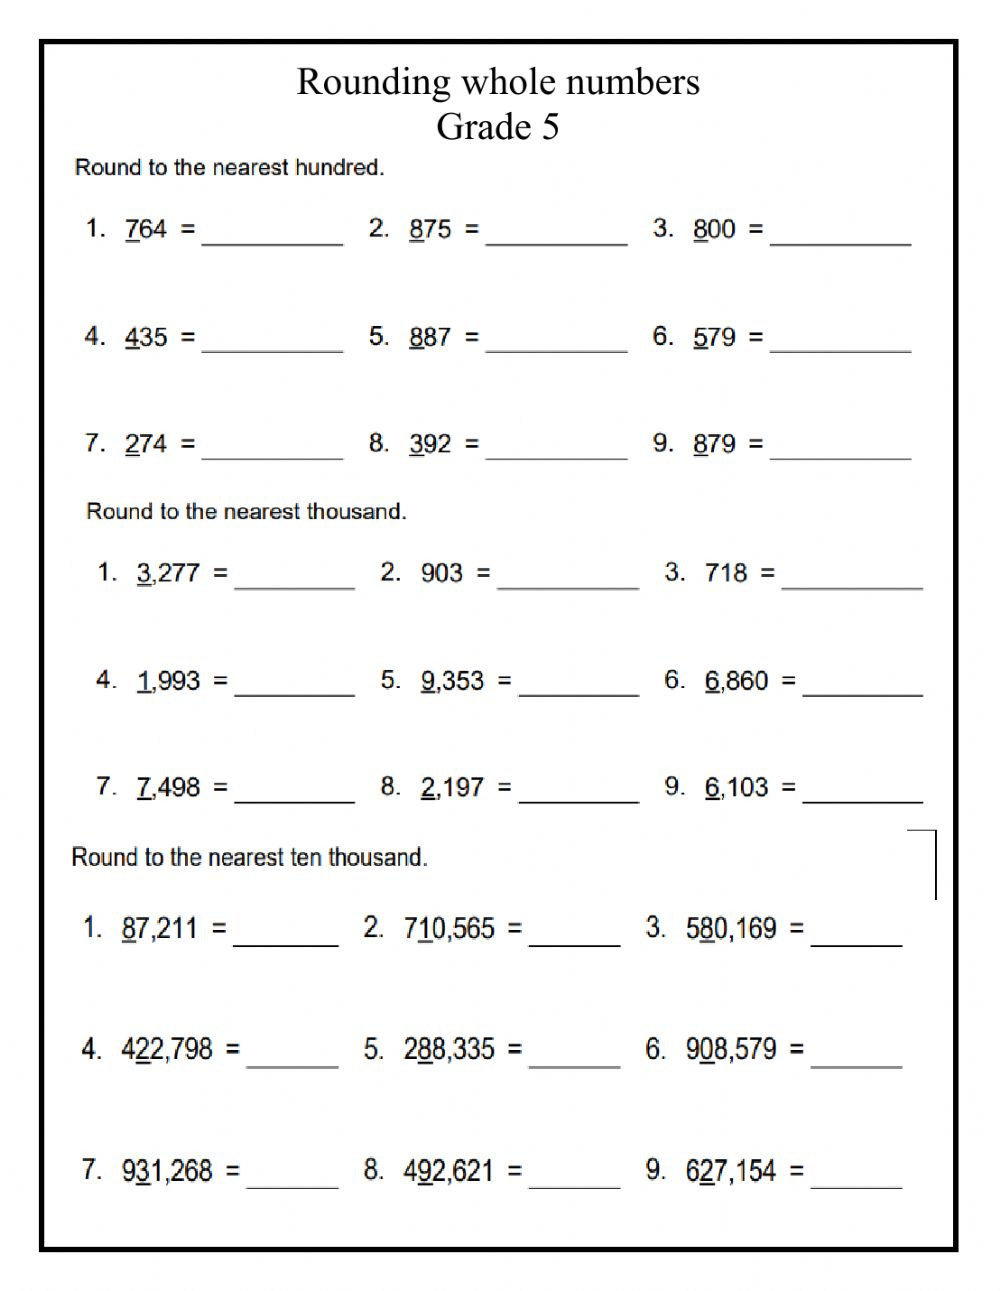 rounding-mixed-numbers-to-whole-numbers-worksheet-2022-numbersworksheets